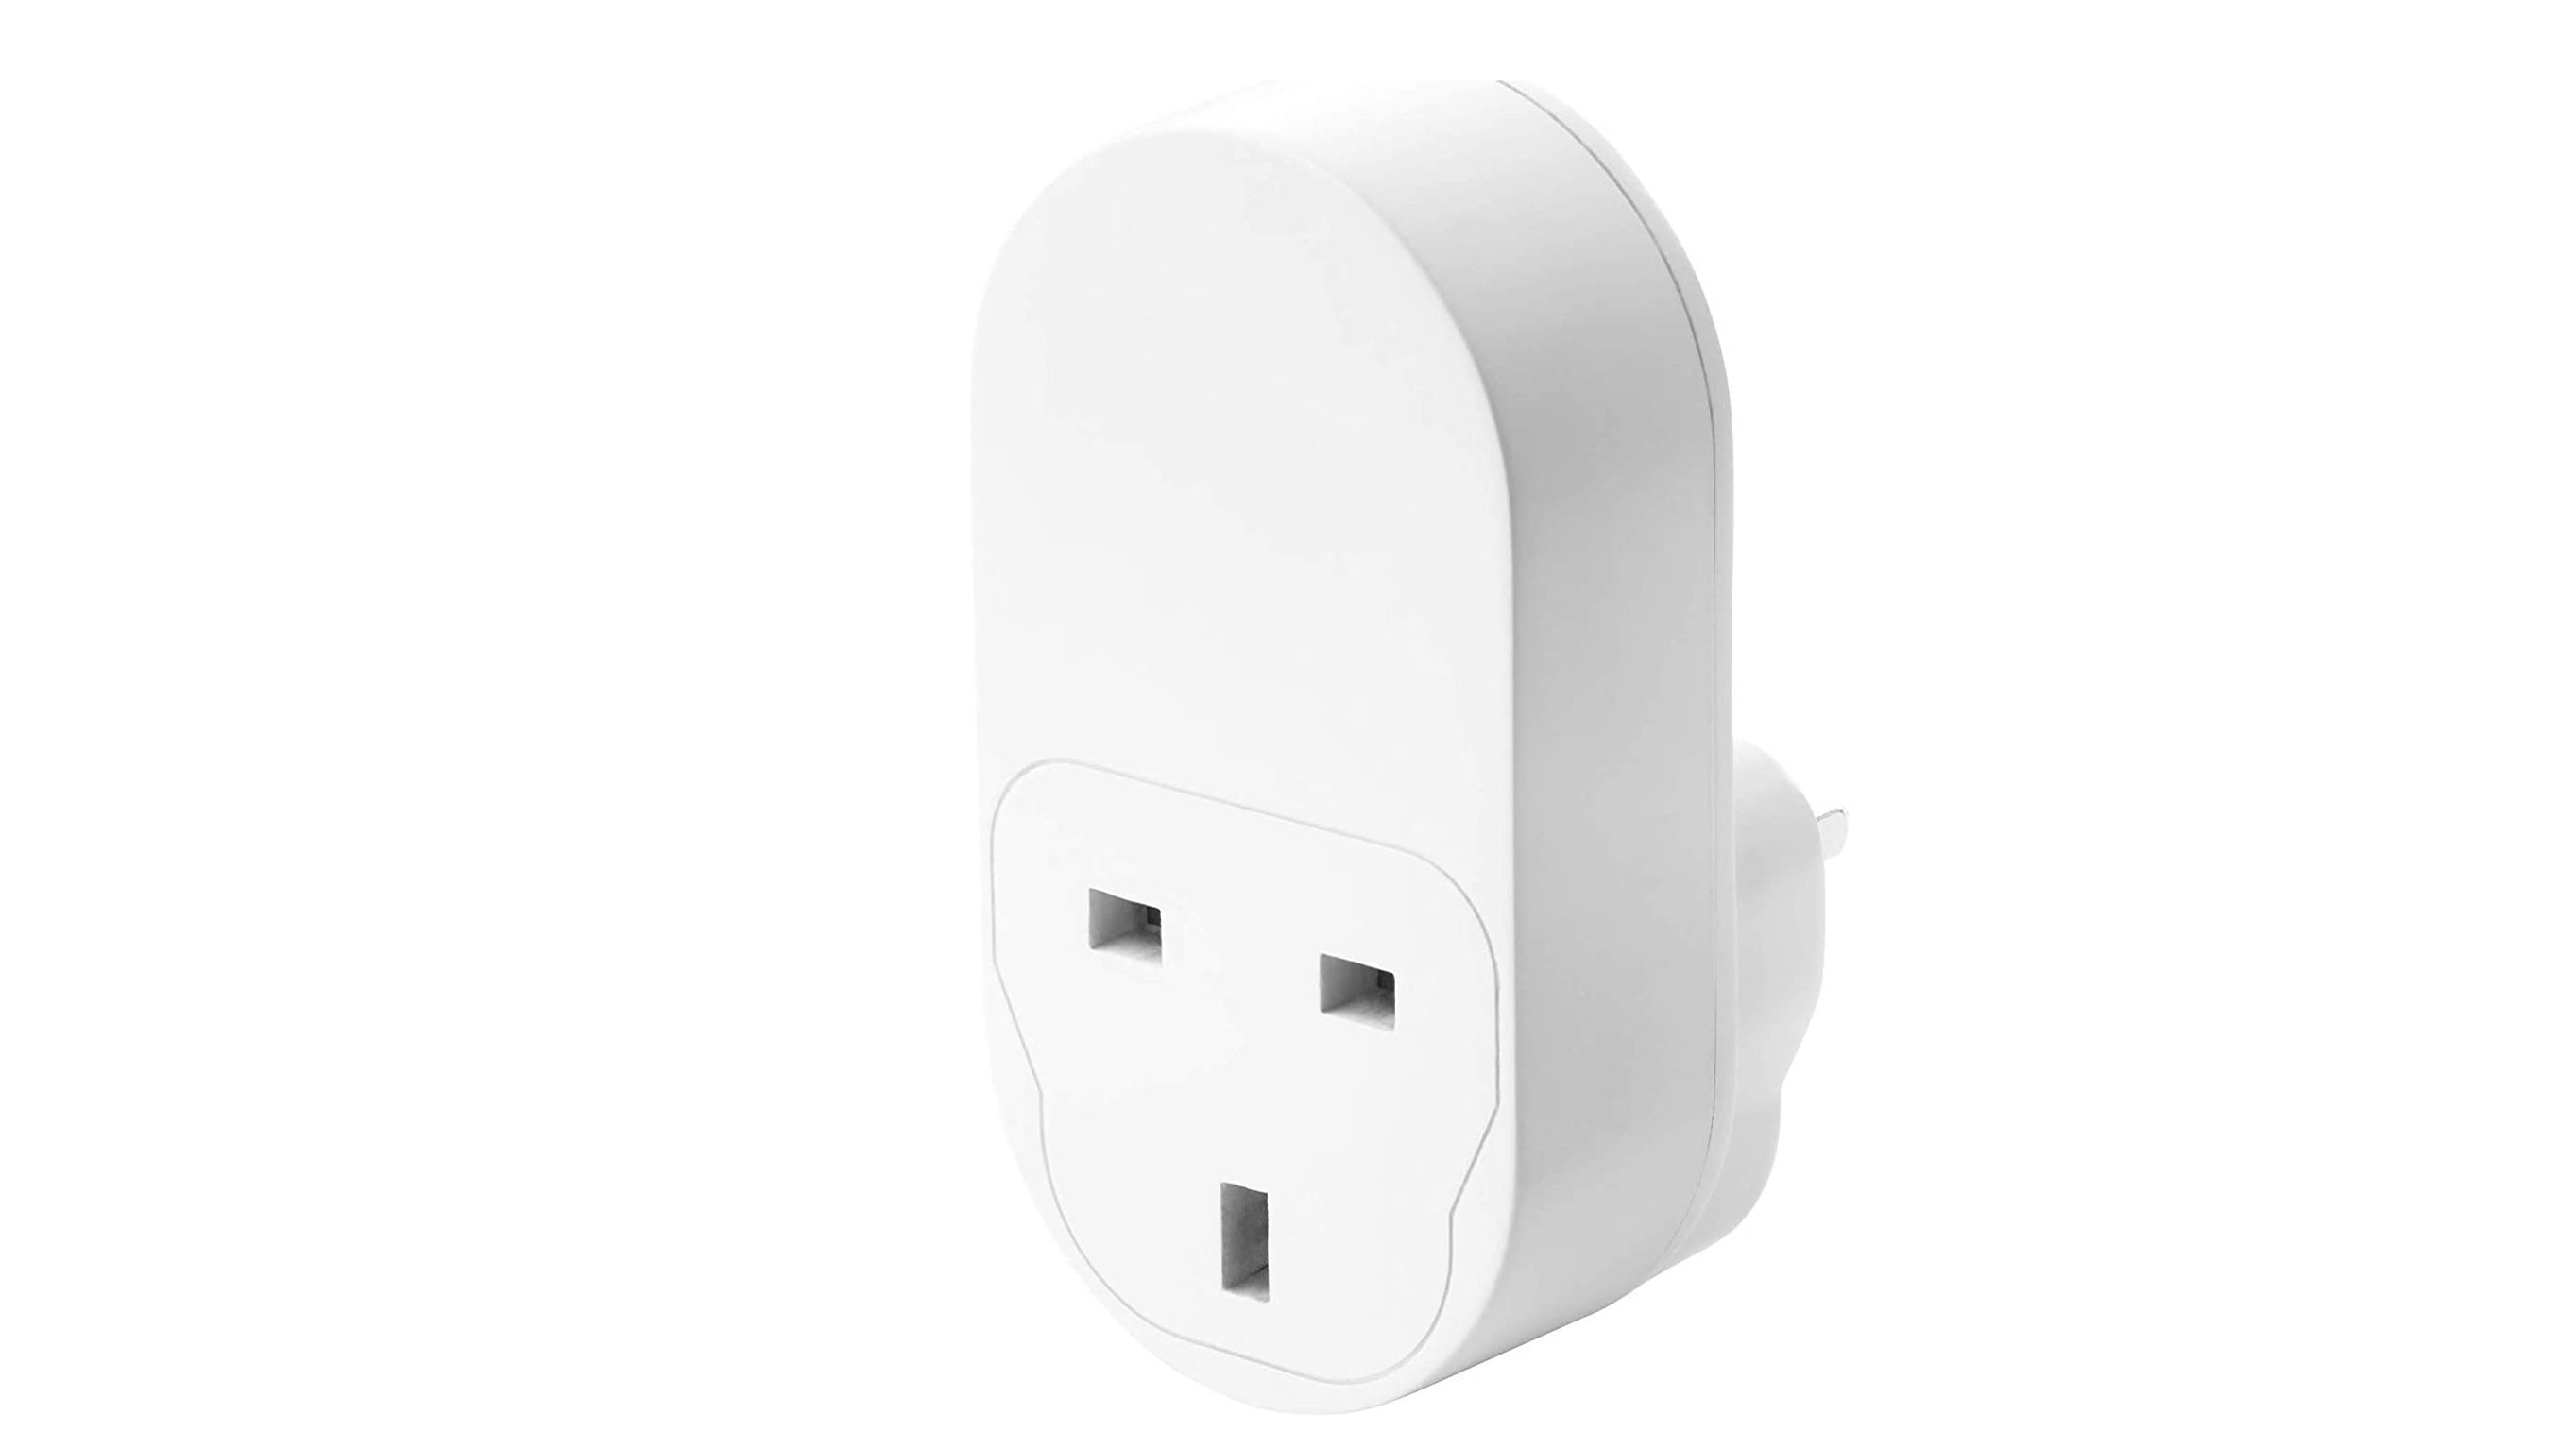 Ikea Trafri Wireless Control outlet on a white background